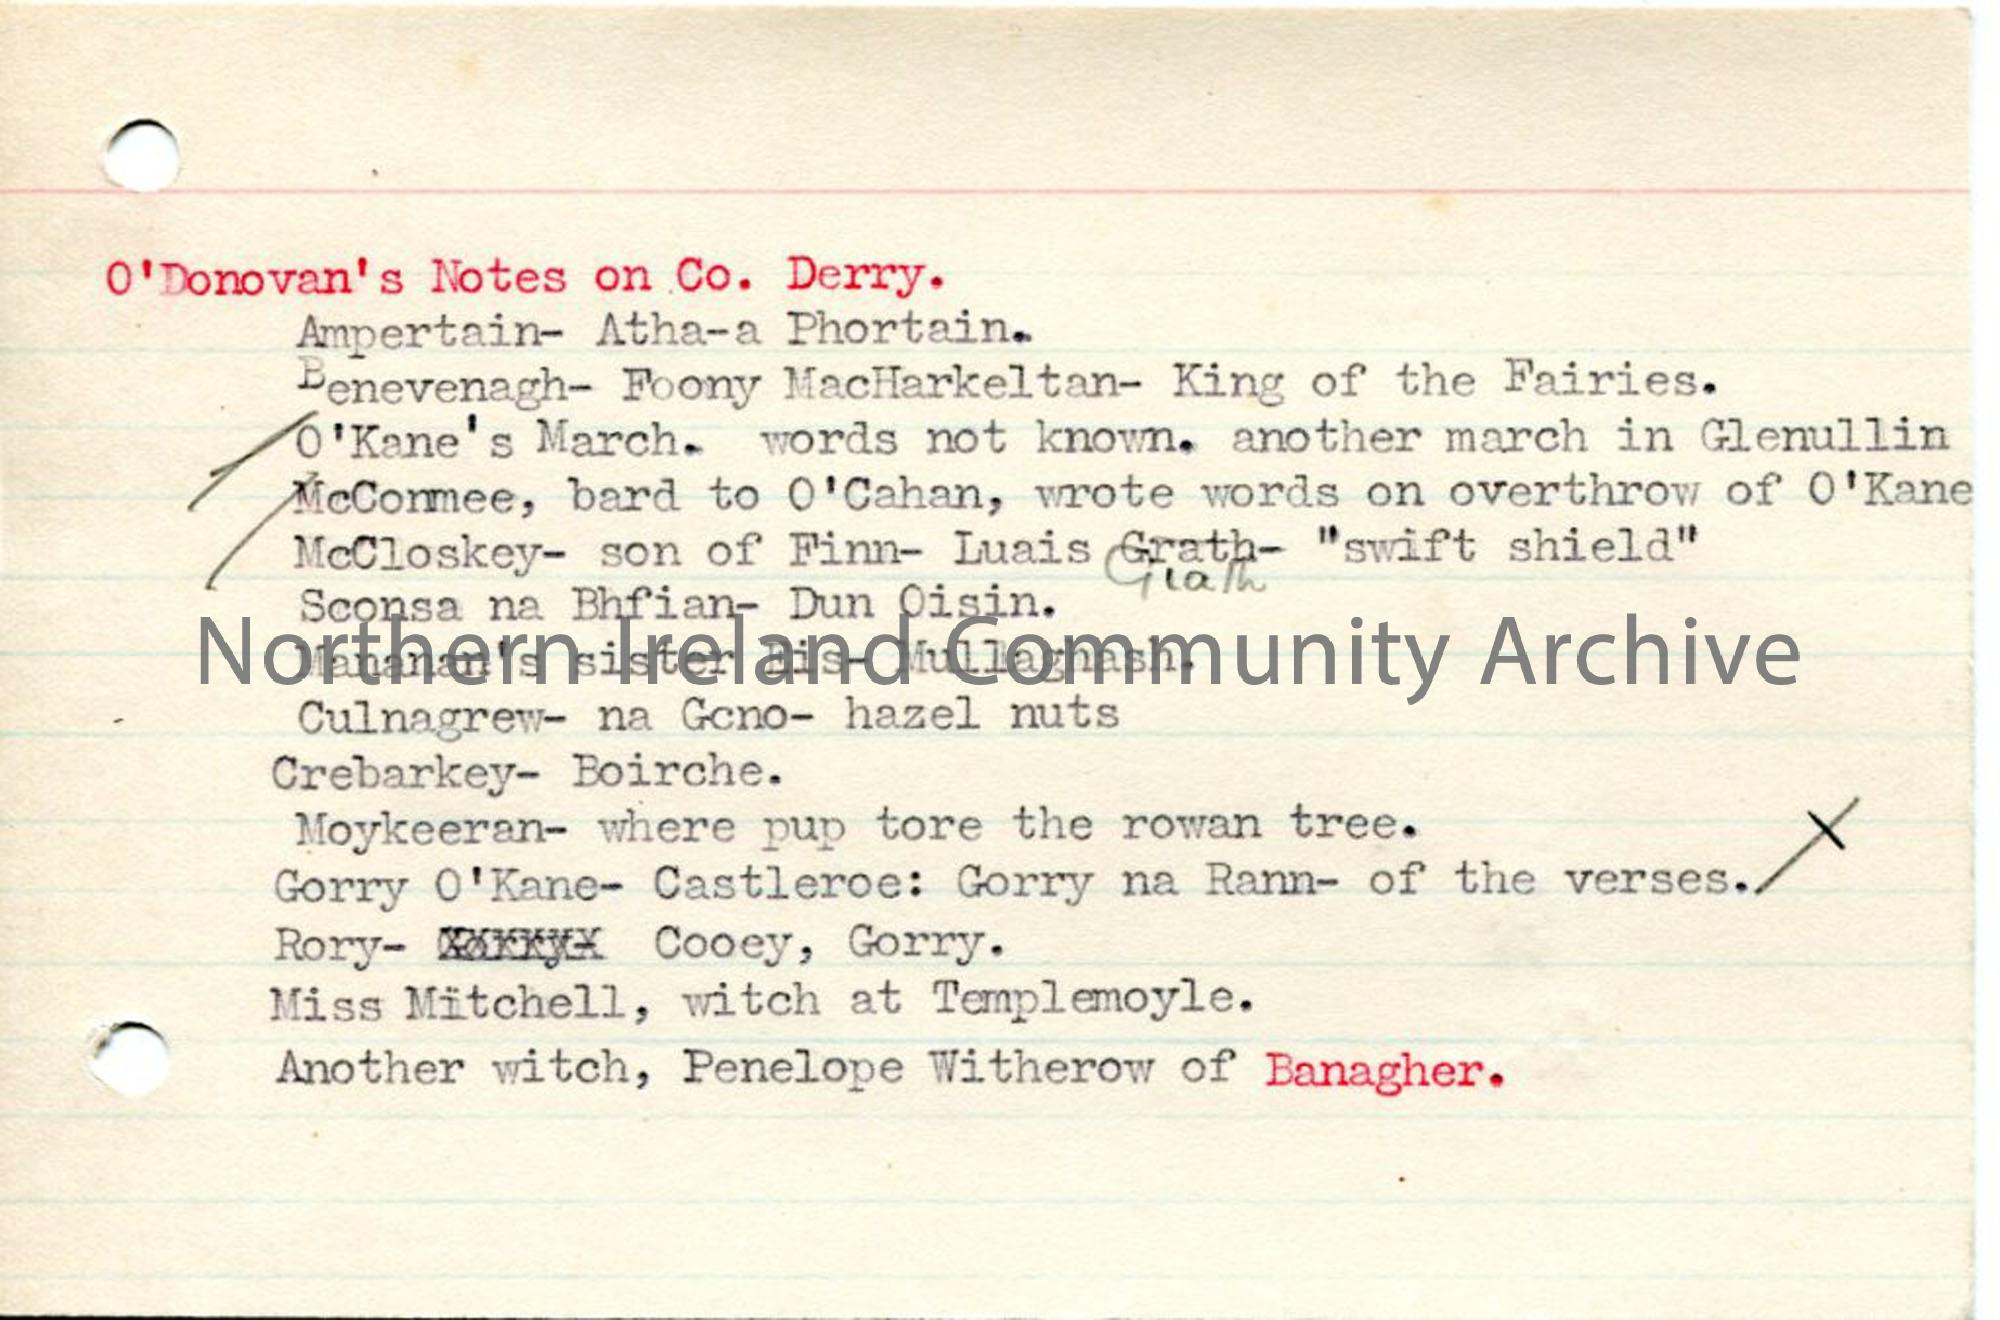 Typed notes: ‘O’Donovan’s Notes on Co. Derry’